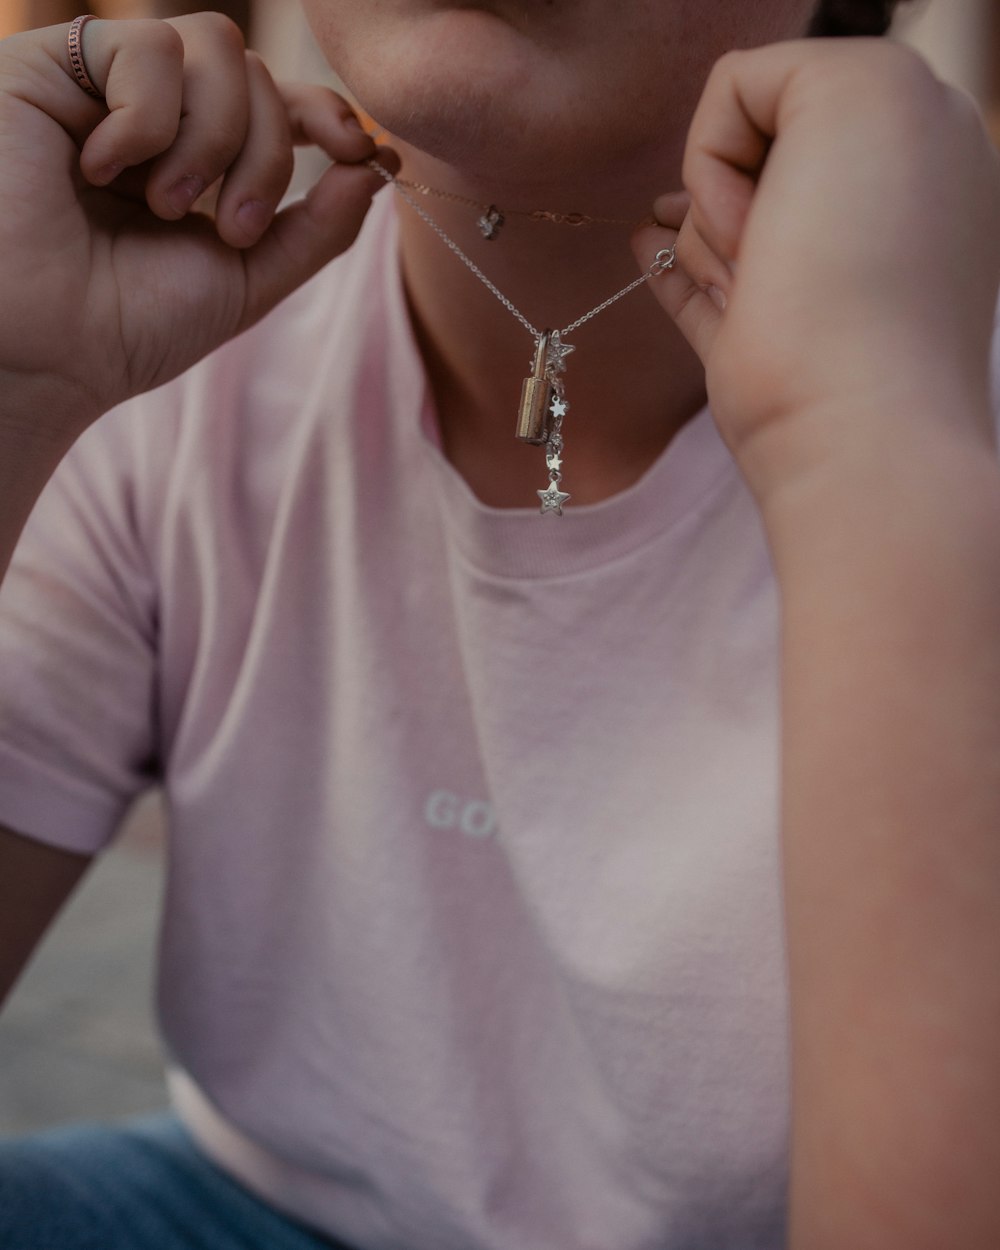 person holding the silver-colored necklace